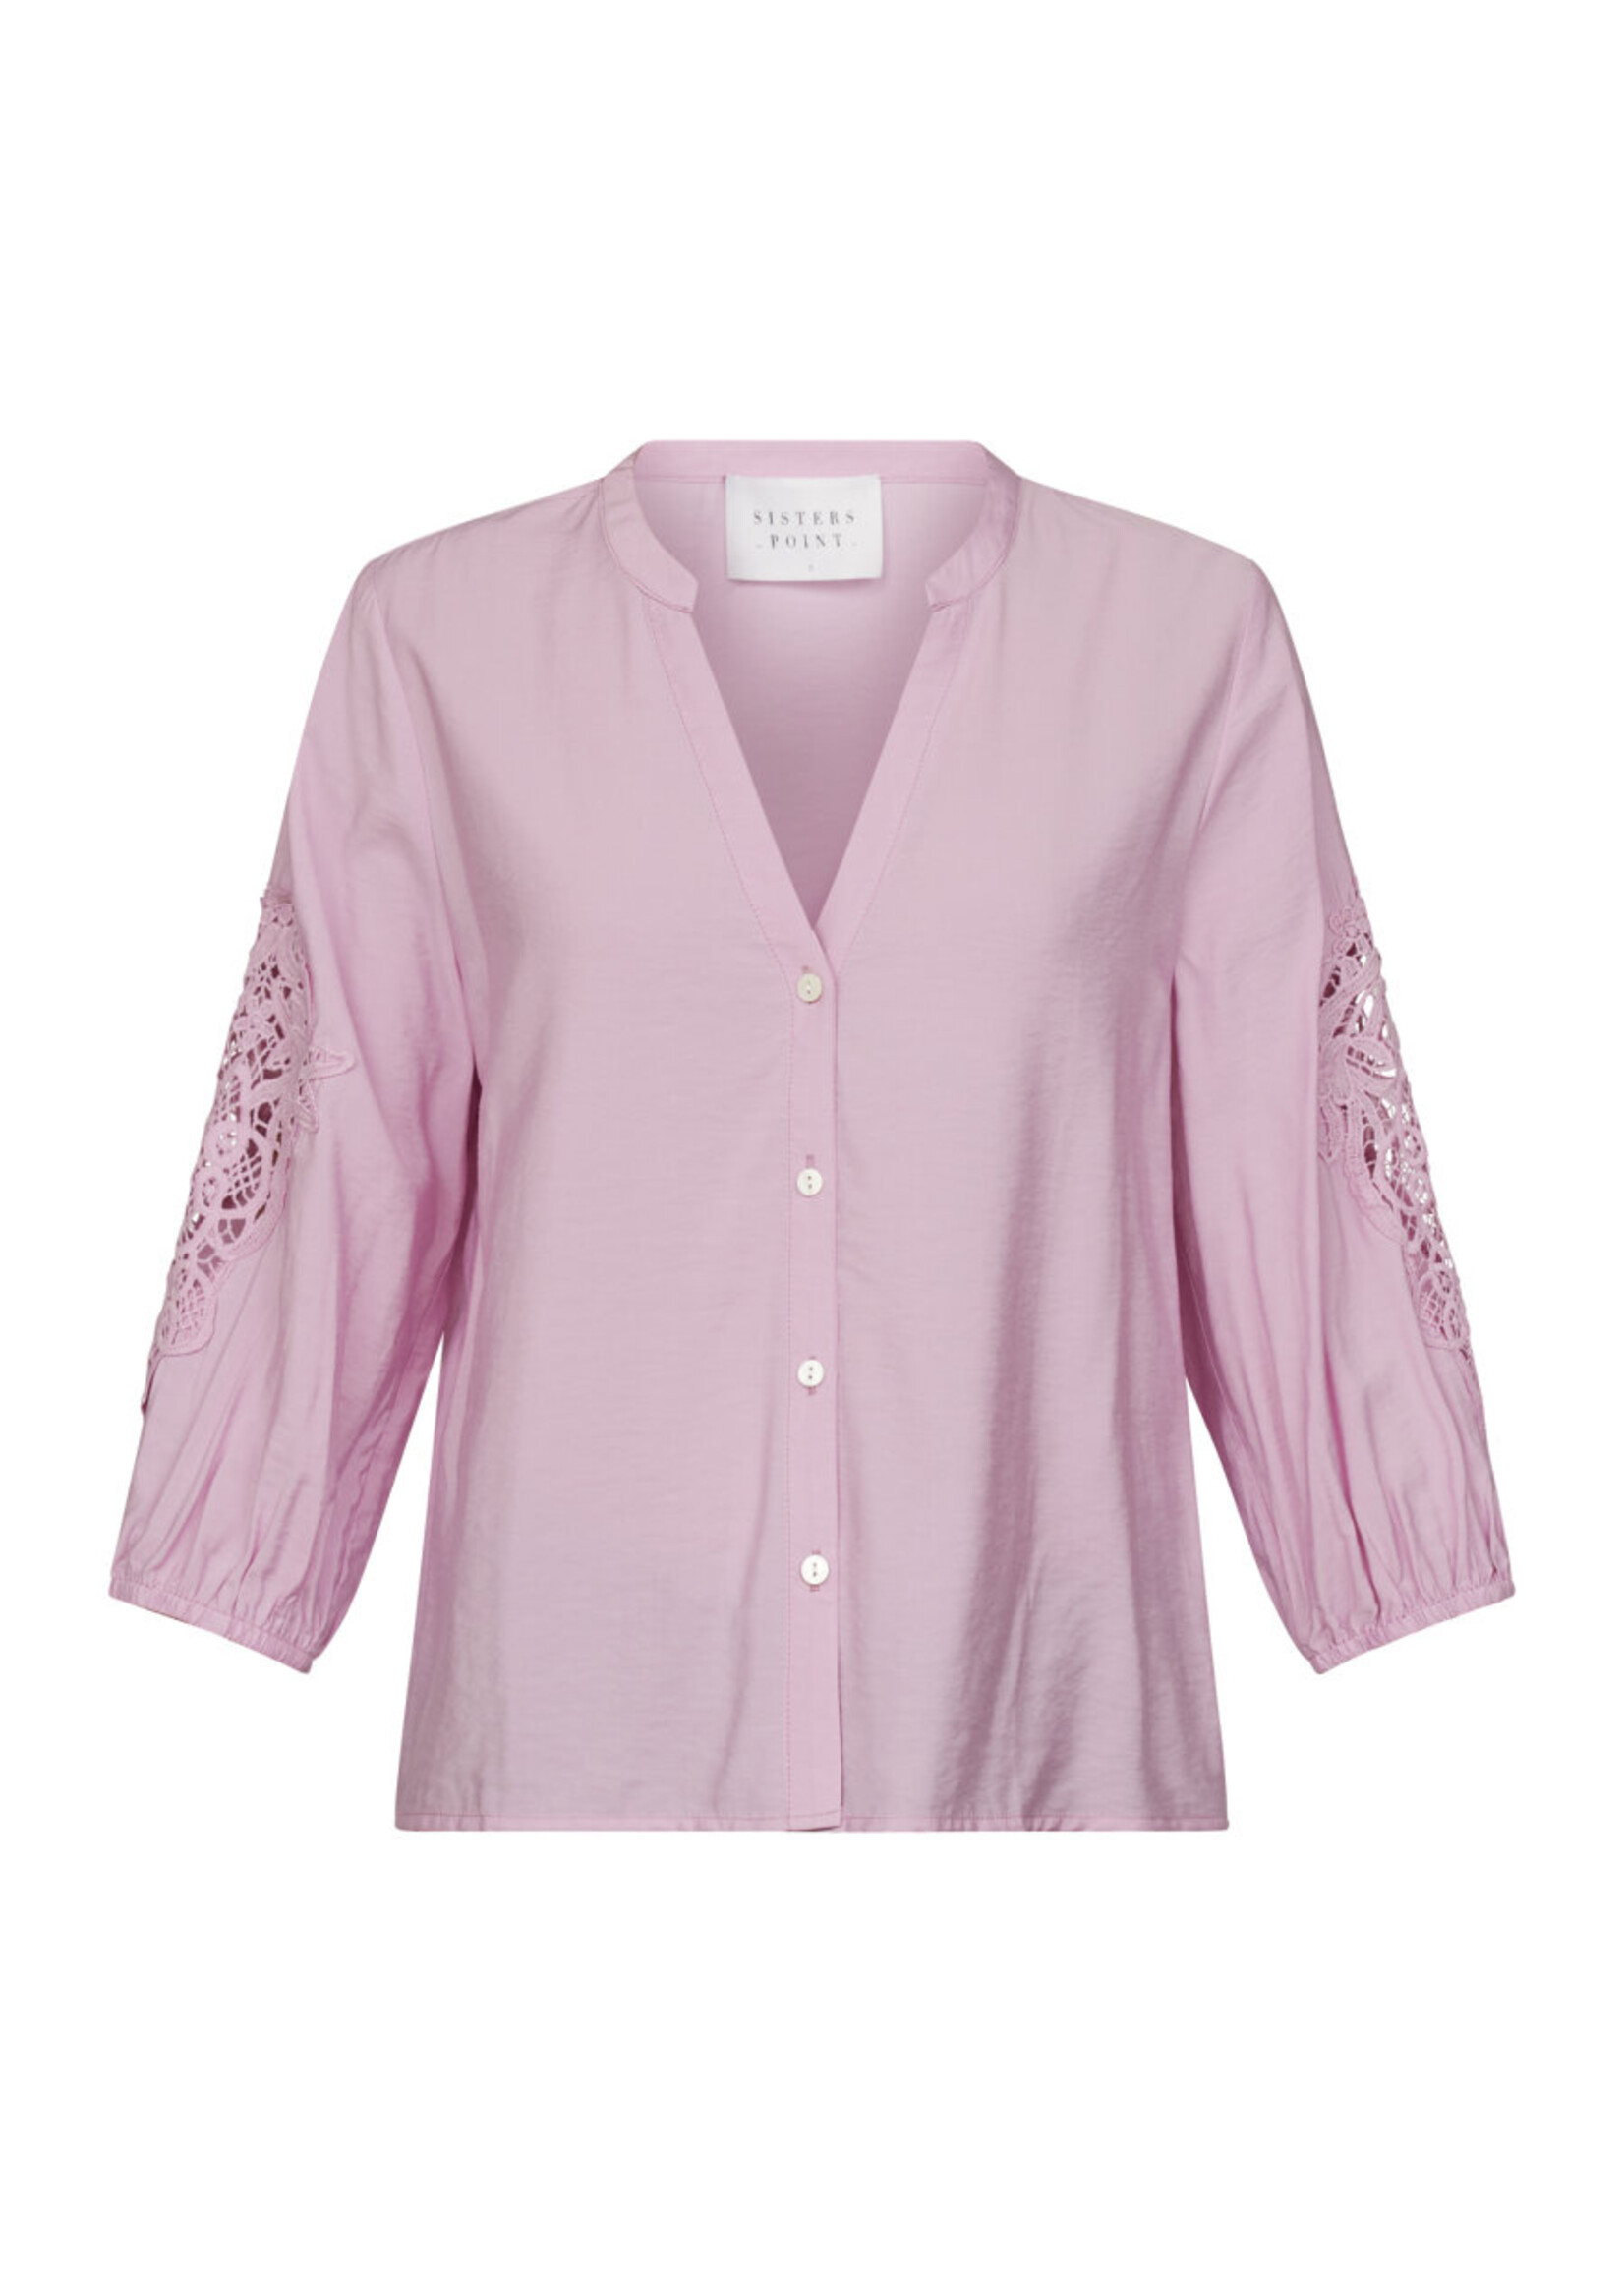 SISTERS POINT Viaba blouse | soft pink